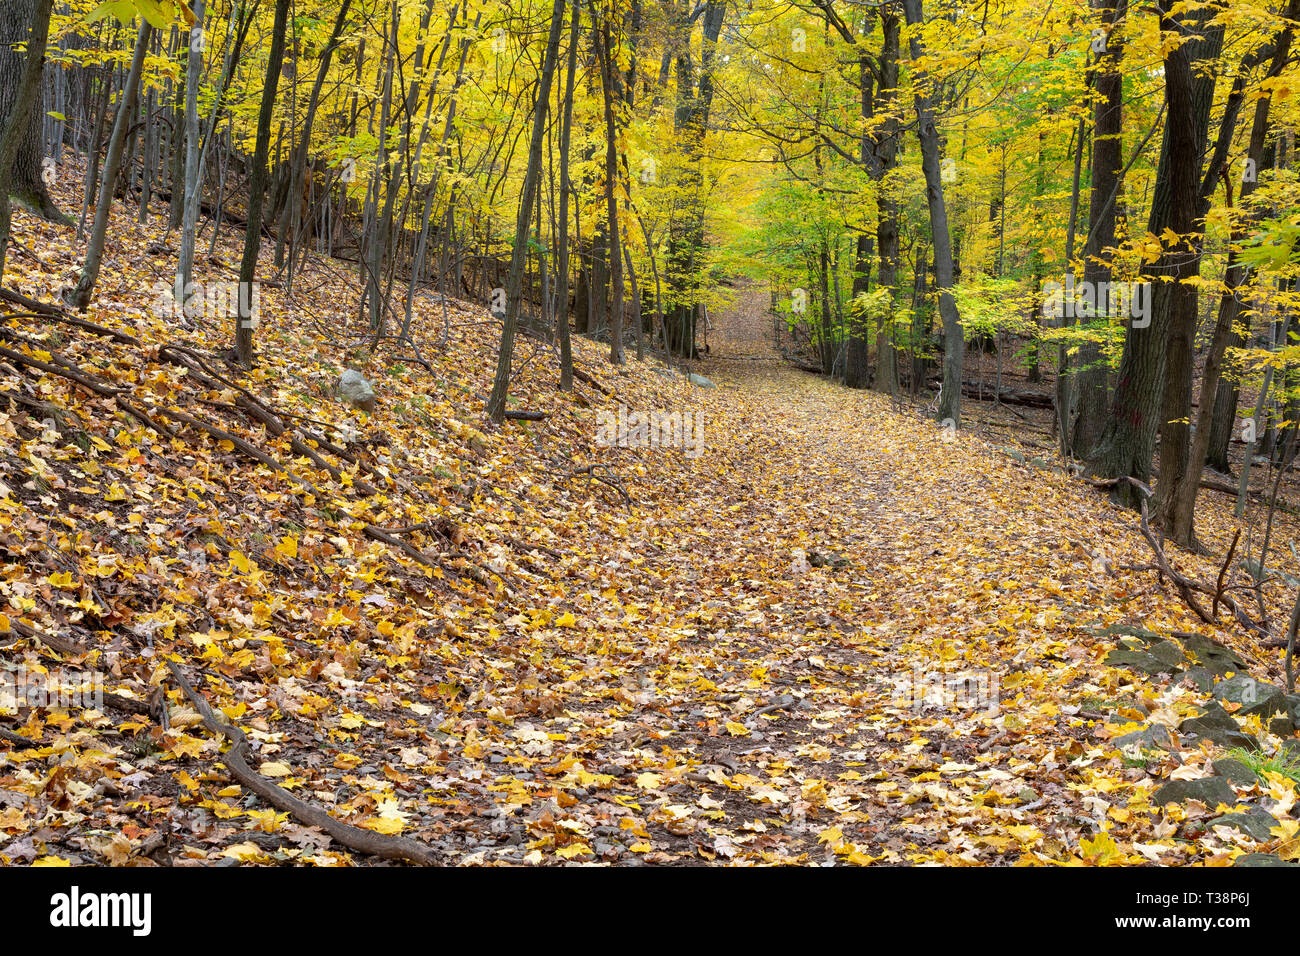 The High Tor Trail passing through fall leaves covering the ground and autumn leaves clinging to the trees. High Tor State Park, New York Stock Photo